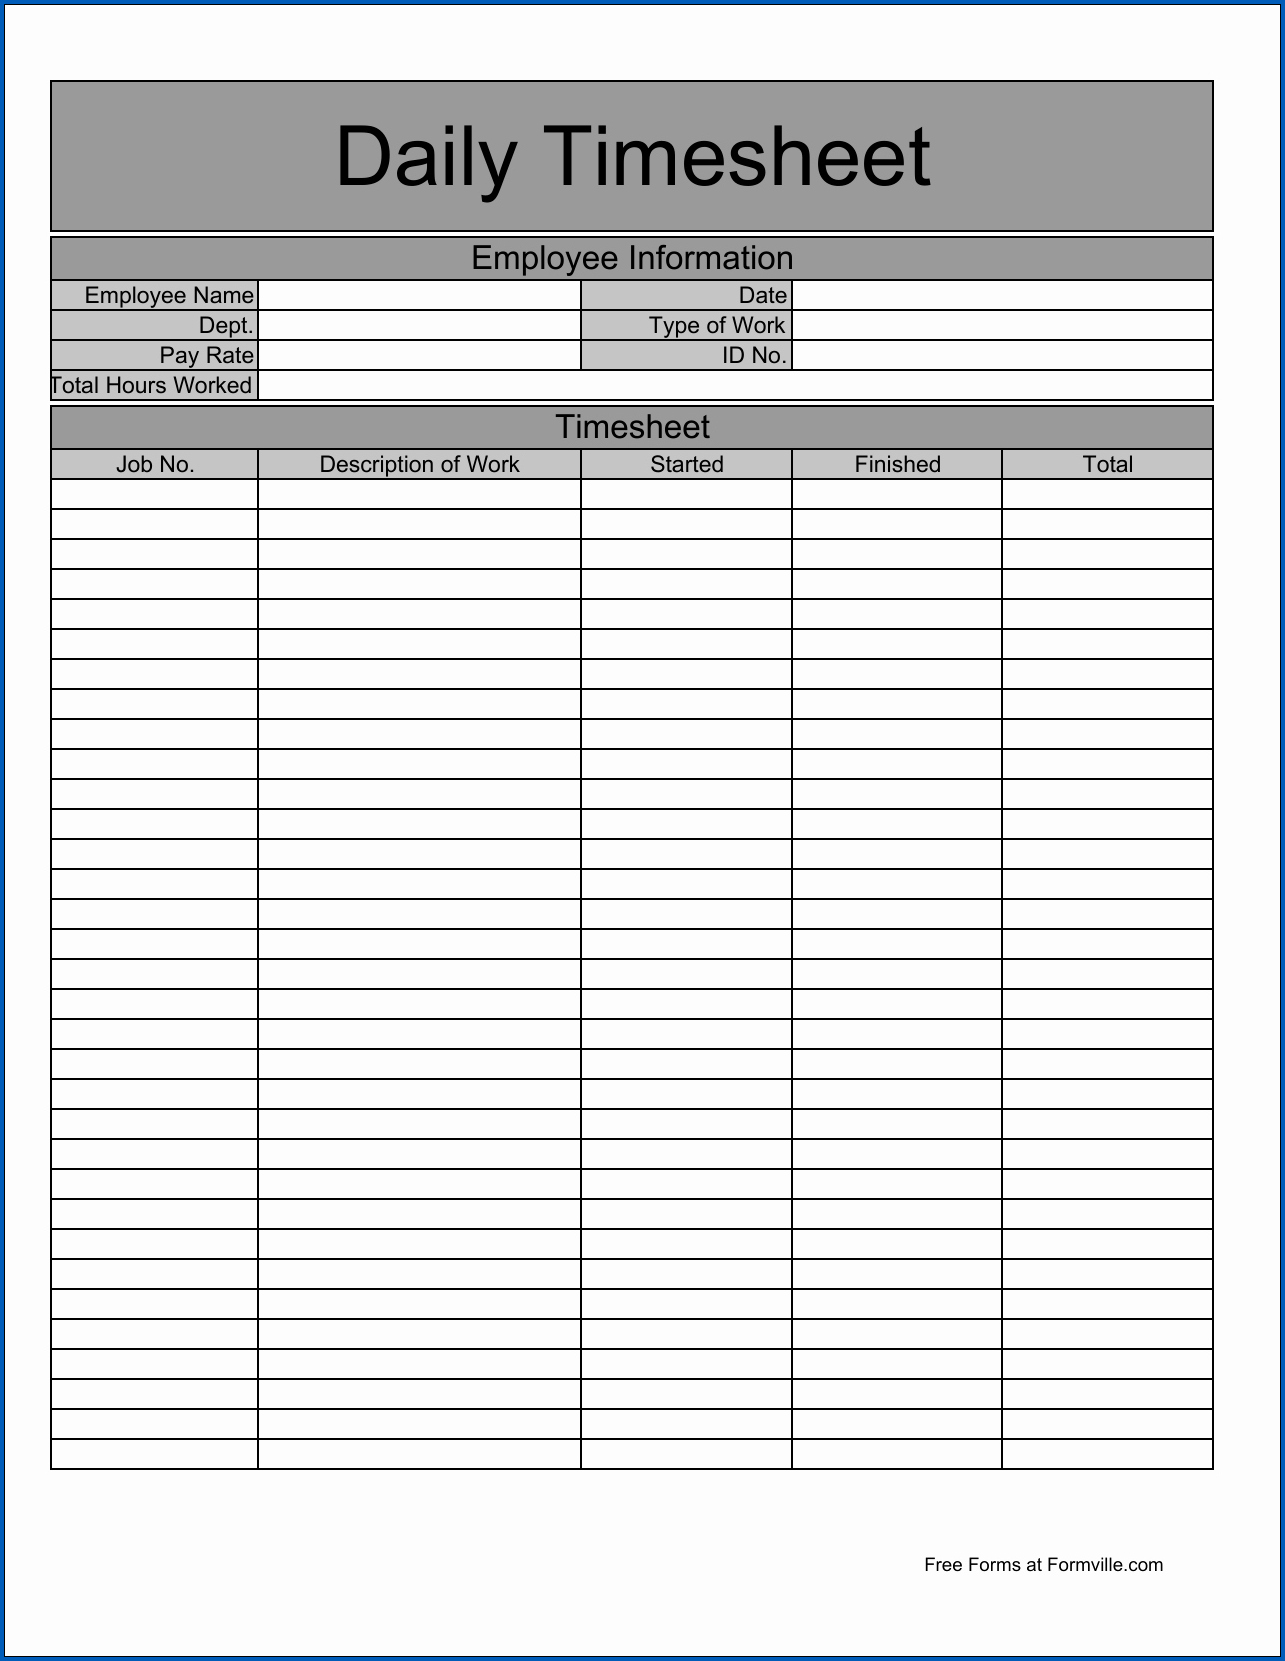 Microsoft Excel Timesheet Template from www.templateral.com